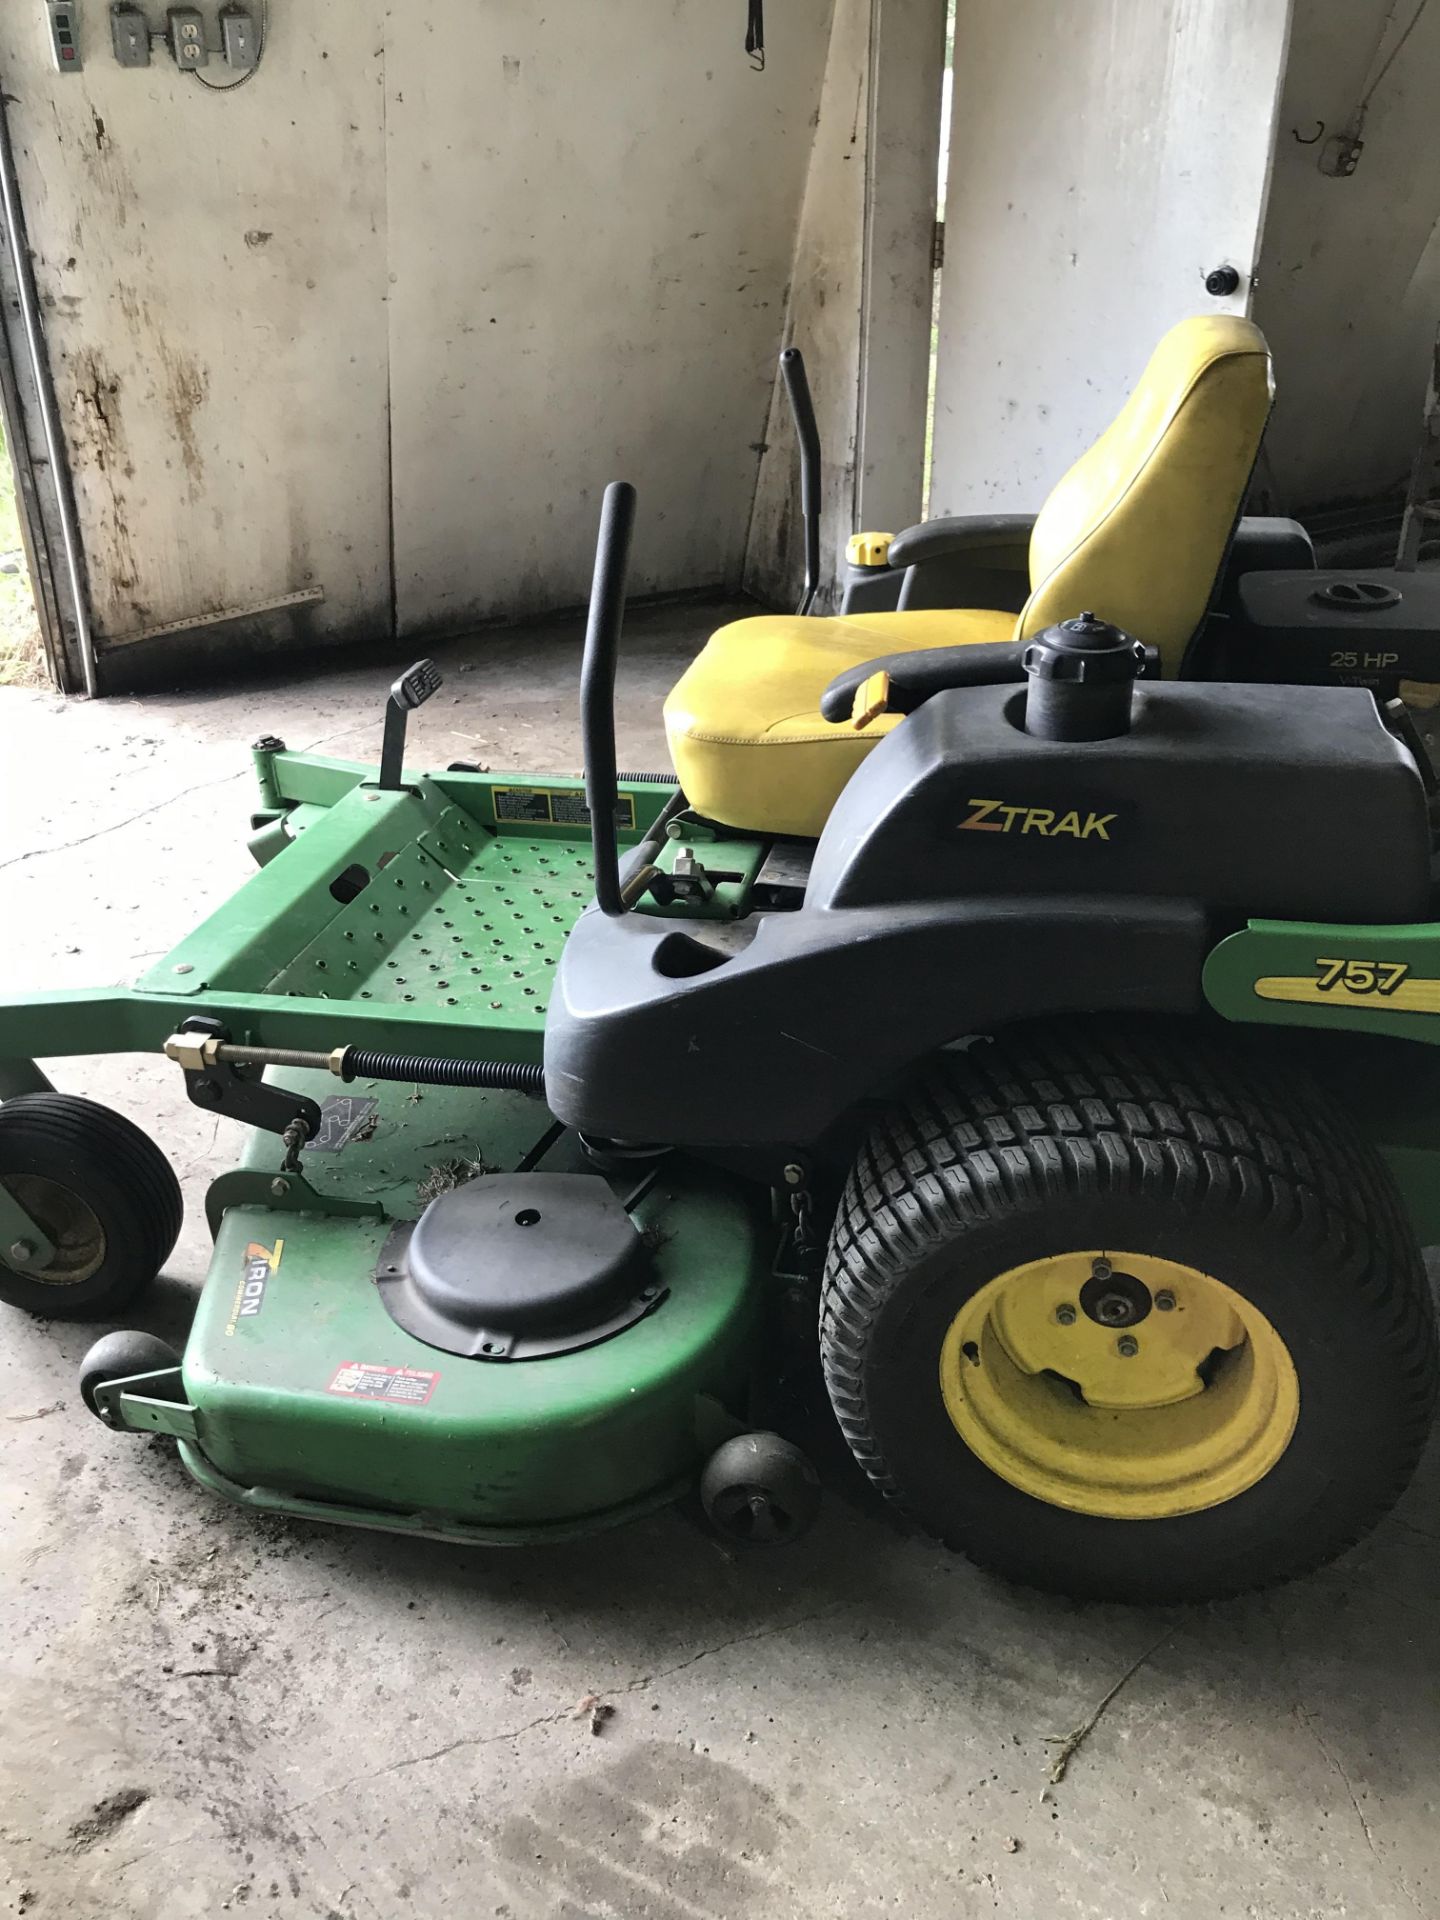 JD Z Track 757 60" Front Mount Mower - 25 HP Gas Motor (sn: TC0757B012898), 843 Hours at Listing - Image 5 of 5